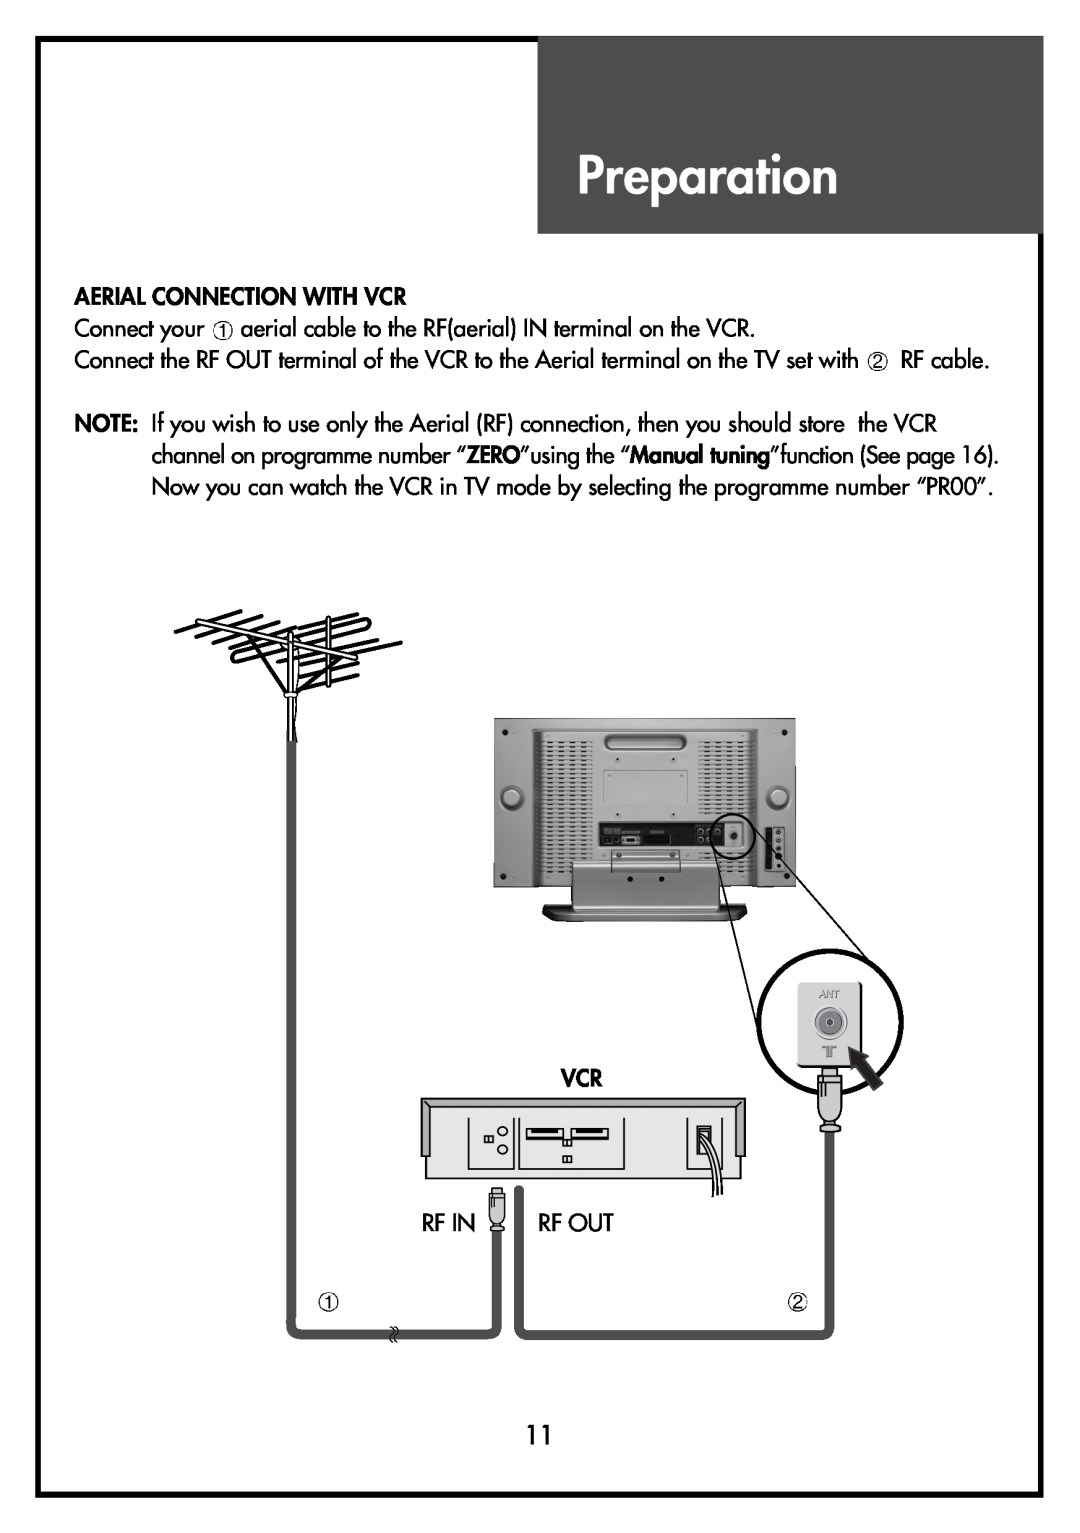 Daewoo DSL-15D4 Preparation, Aerial Connection With Vcr, Connect your aerial cable to the RFaerial IN terminal on the VCR 